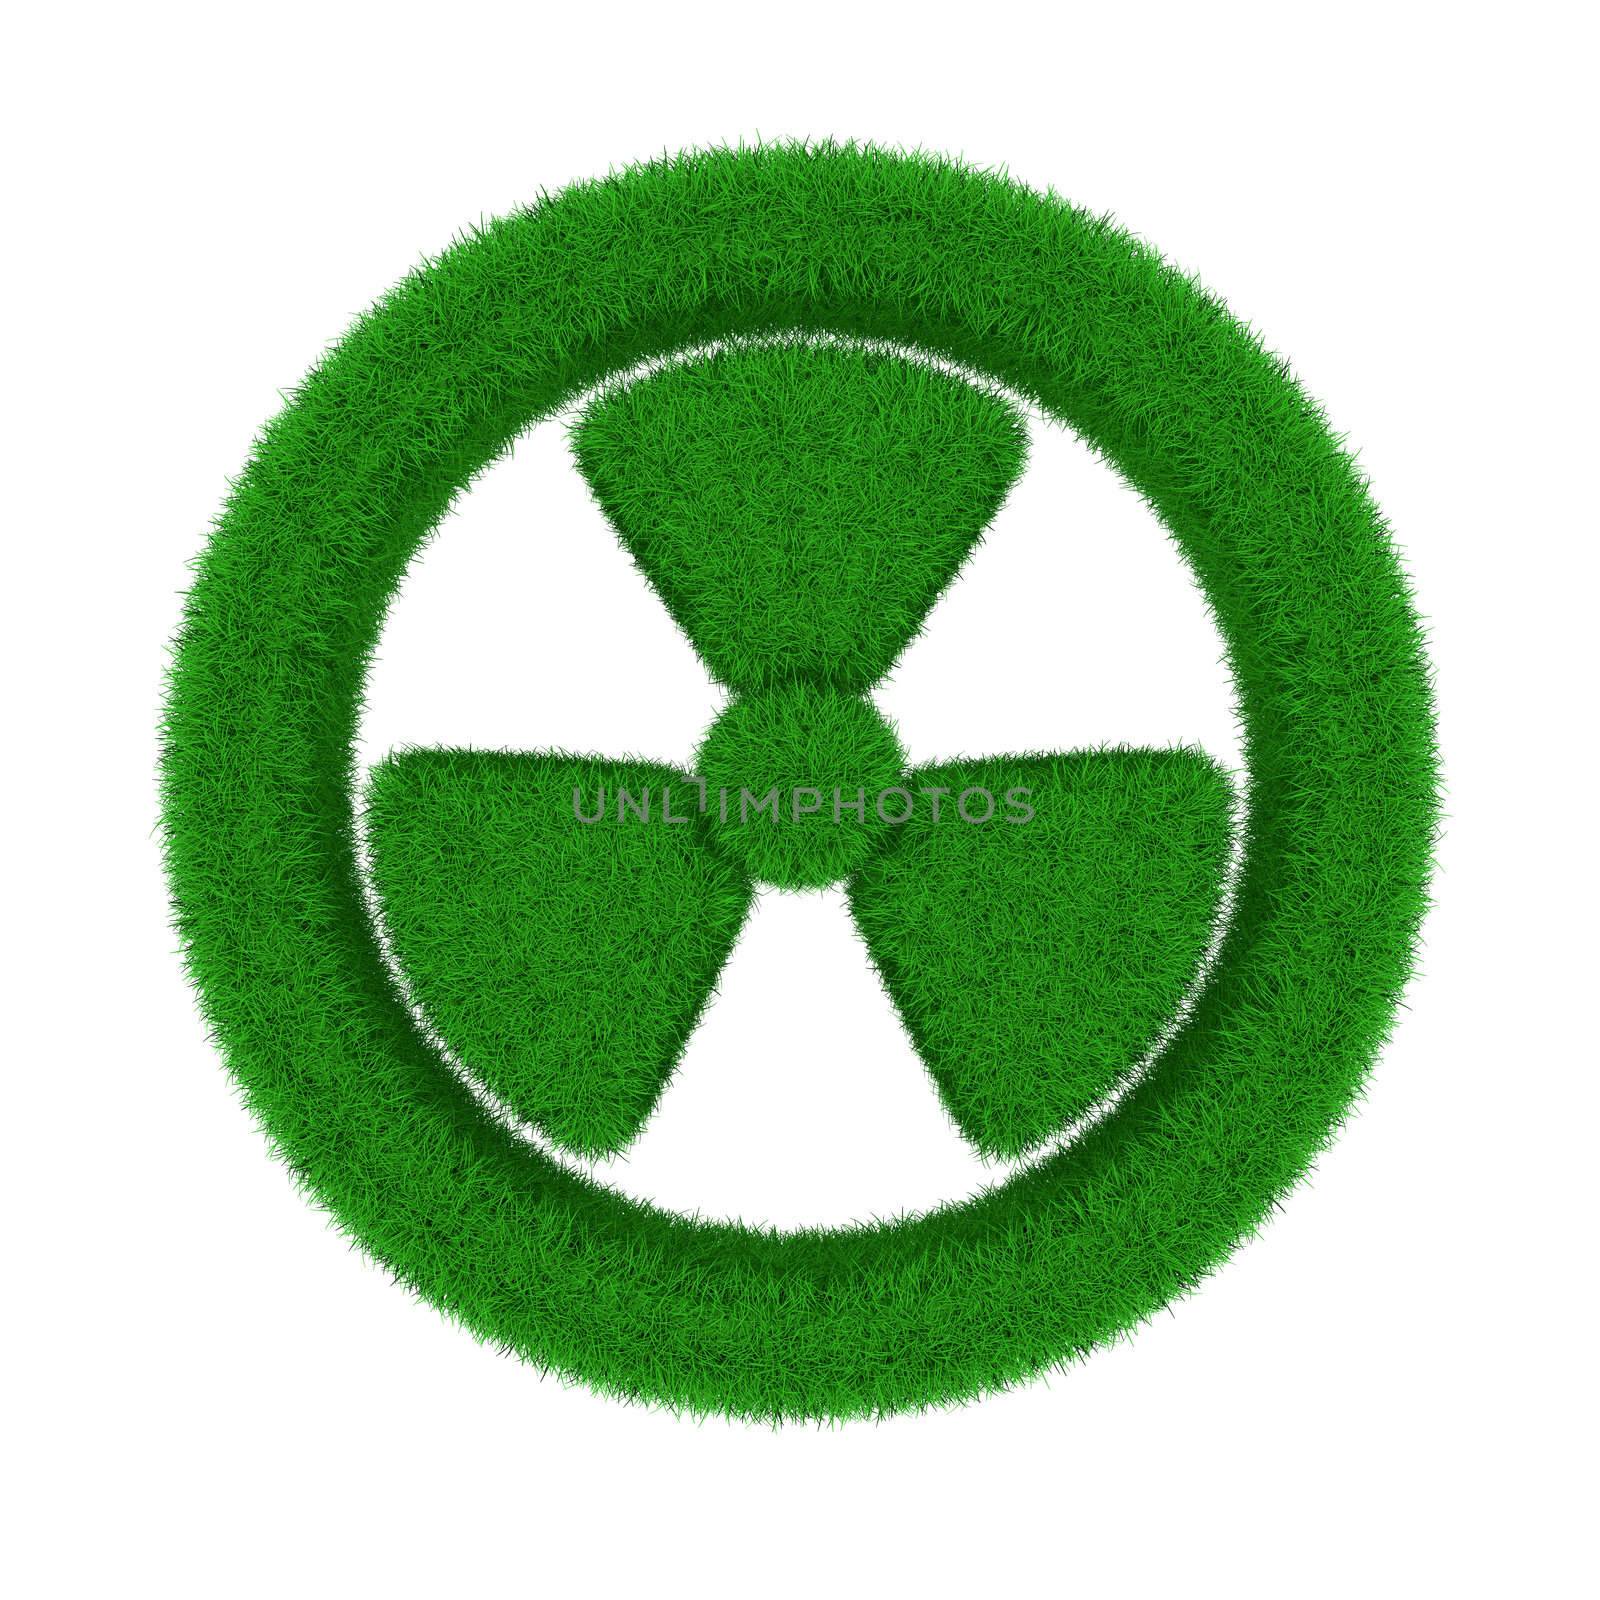 radiation symbol from grass. Isolated 3D image